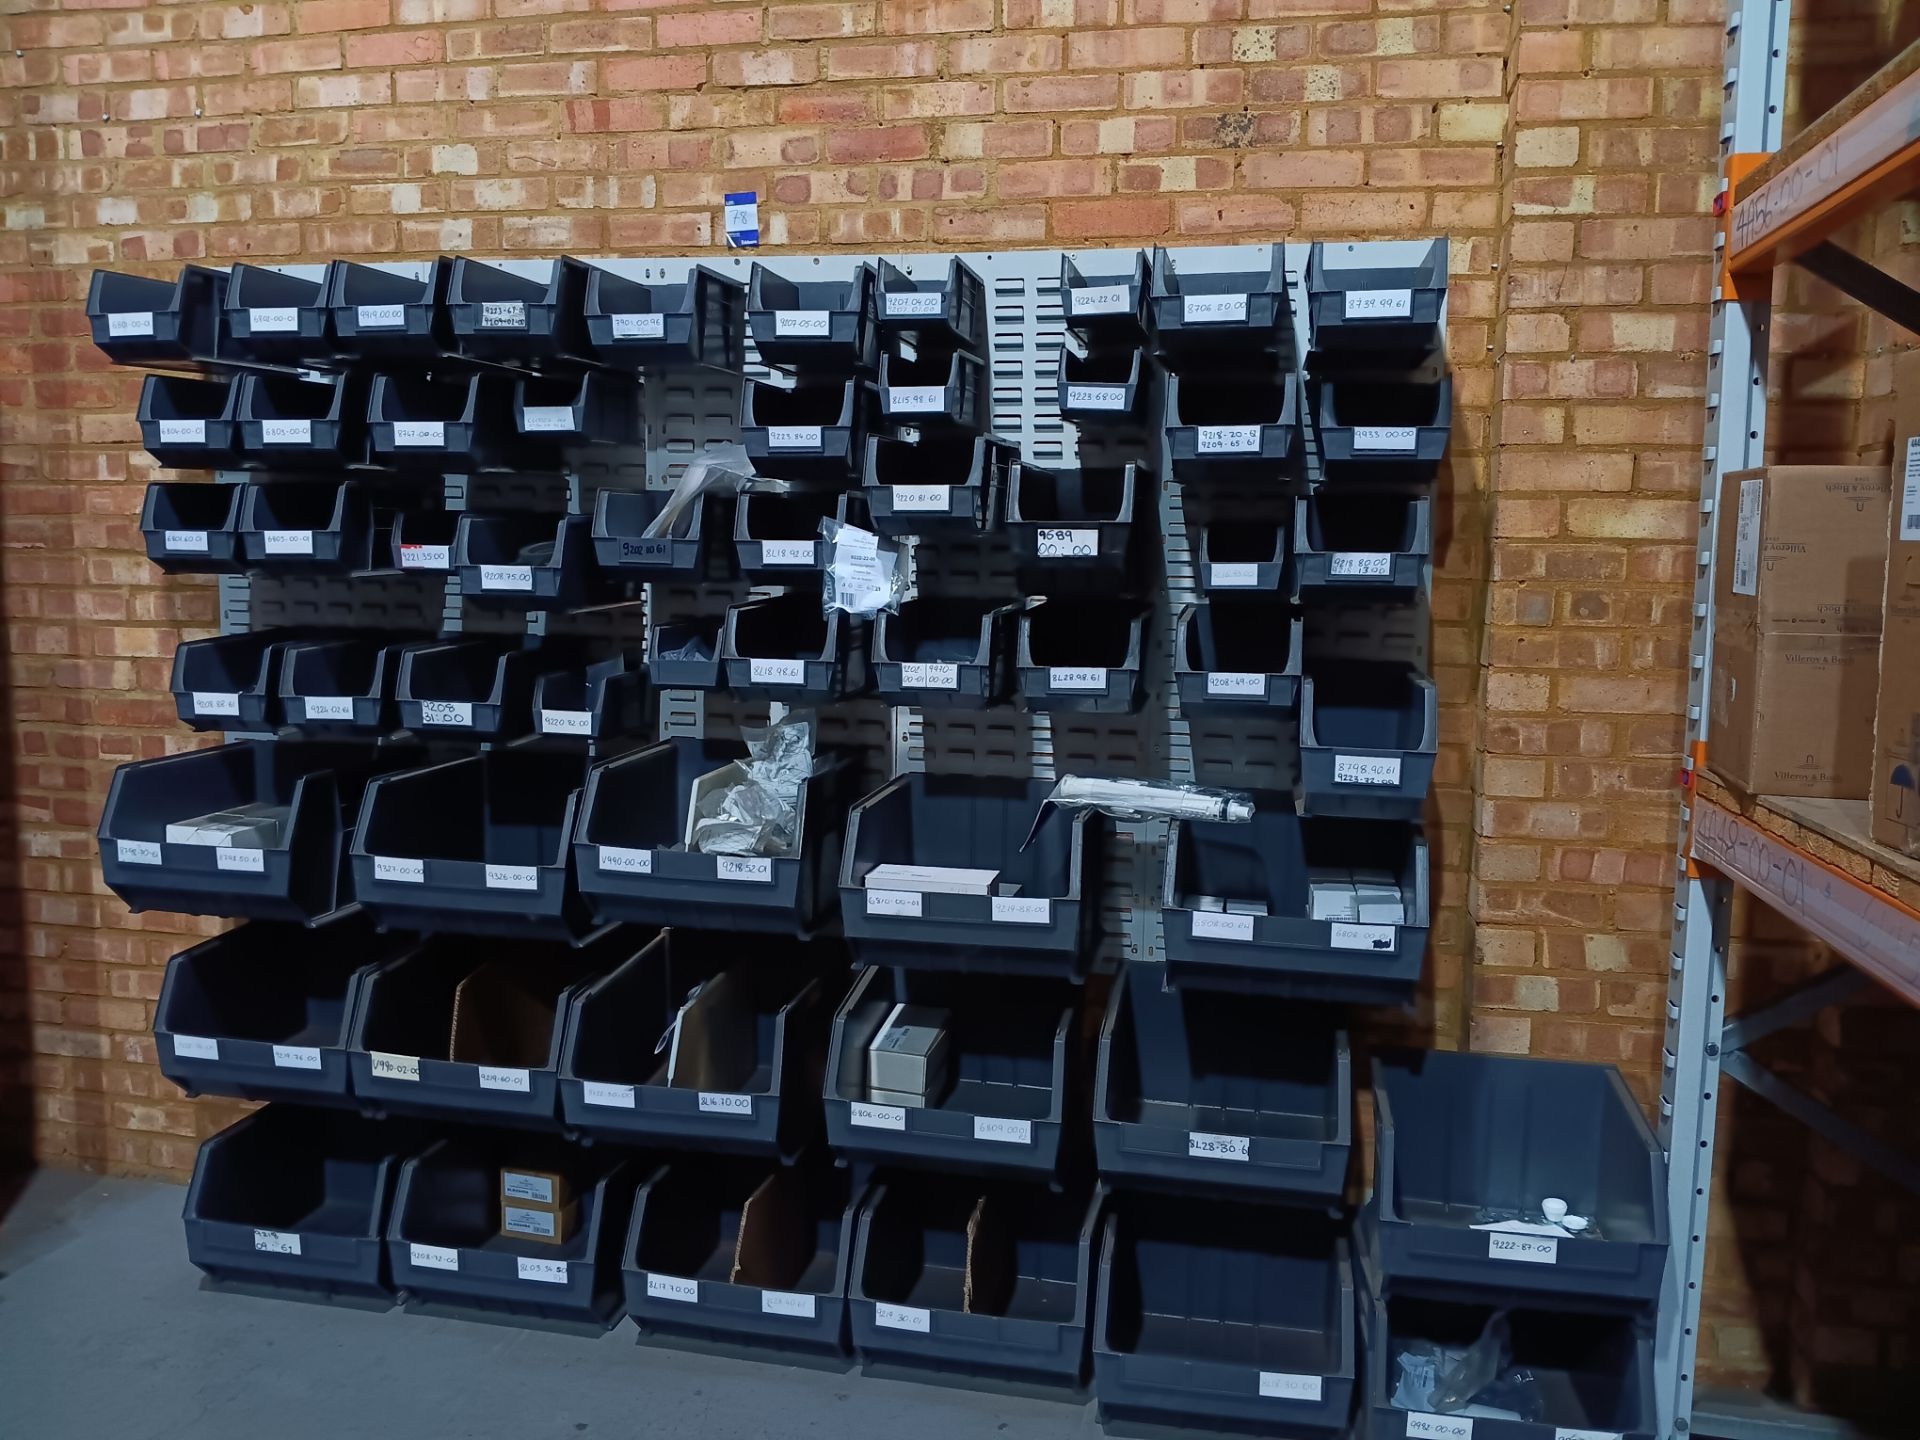 Large selection of Various sized grey Lin bins, co